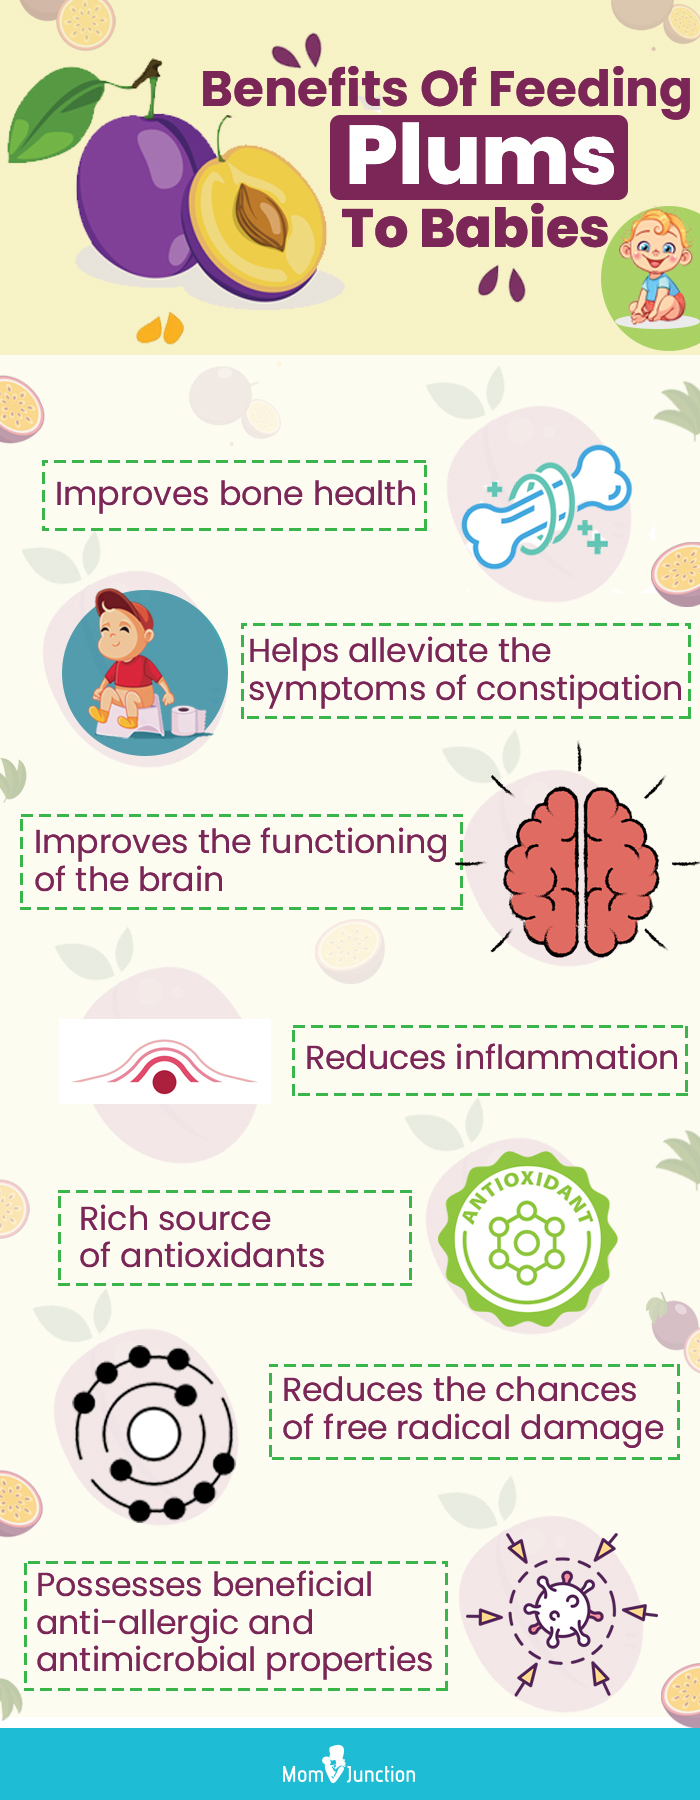 benefits of feeding plums to babies (infographic)